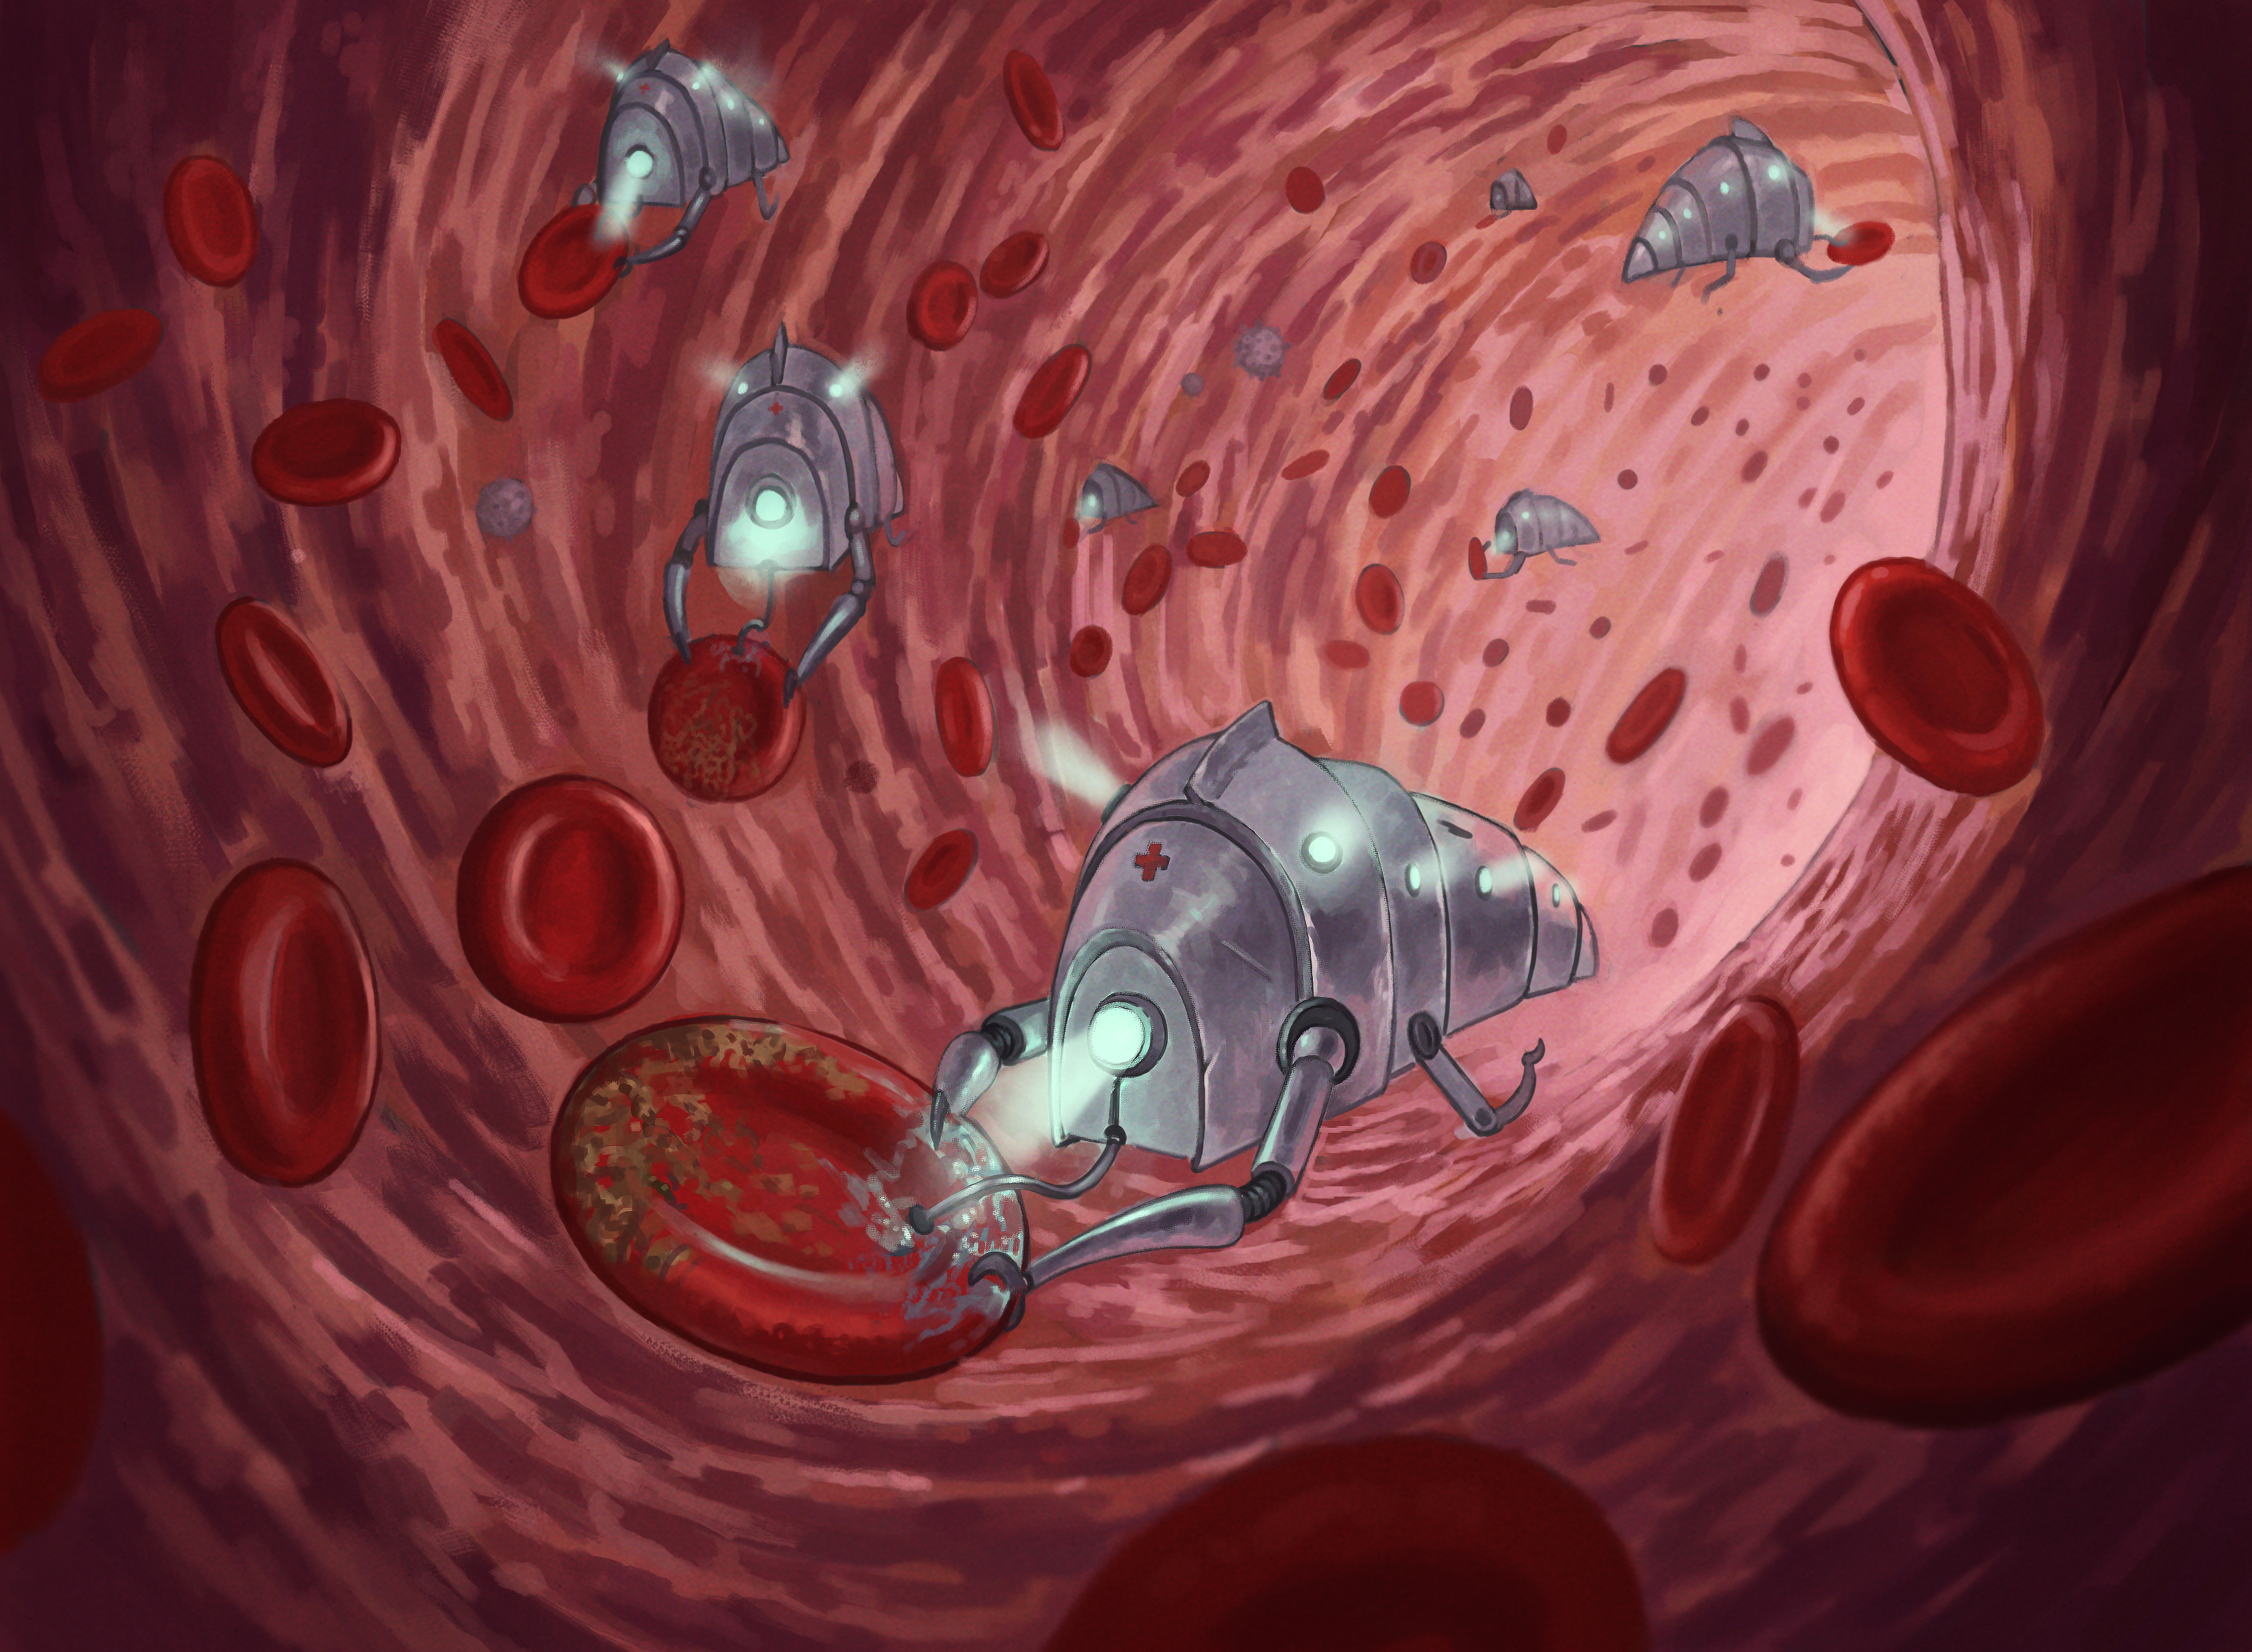 Medical Sample collecting bots collect mutated blood cells for analysis